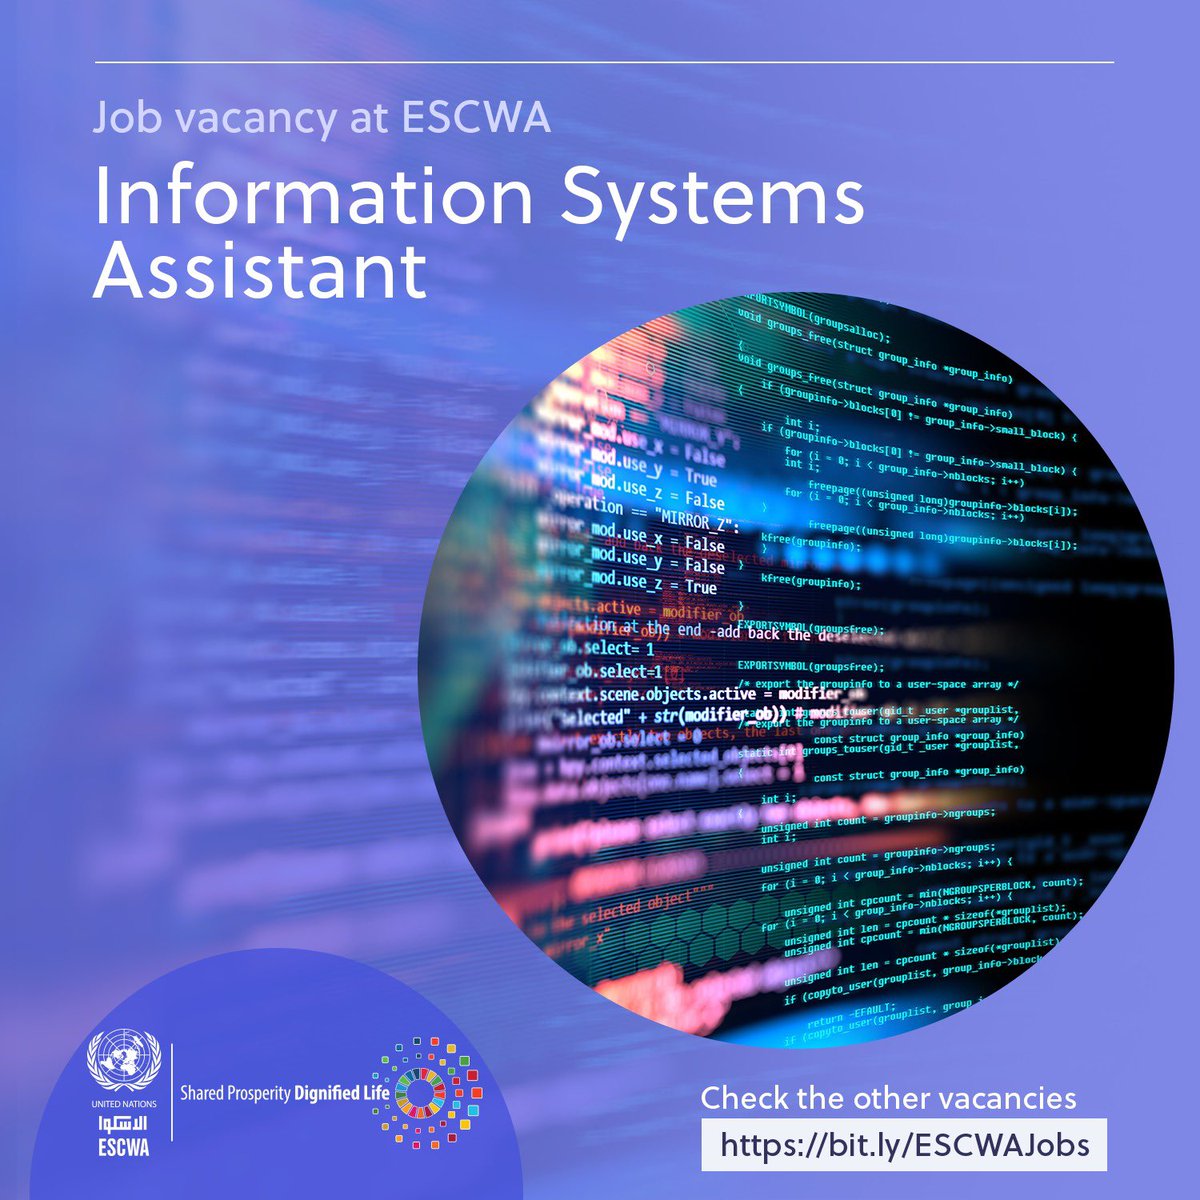 📢 Job vacancy at #ESCWA!

Title: Information Systems Assistant
Experience: 7+ years in information systems analysis and programming, systems administration and maintenance, and software development
📆 Deadline: 1 May
🔗: bit.ly/ESCWAJobs